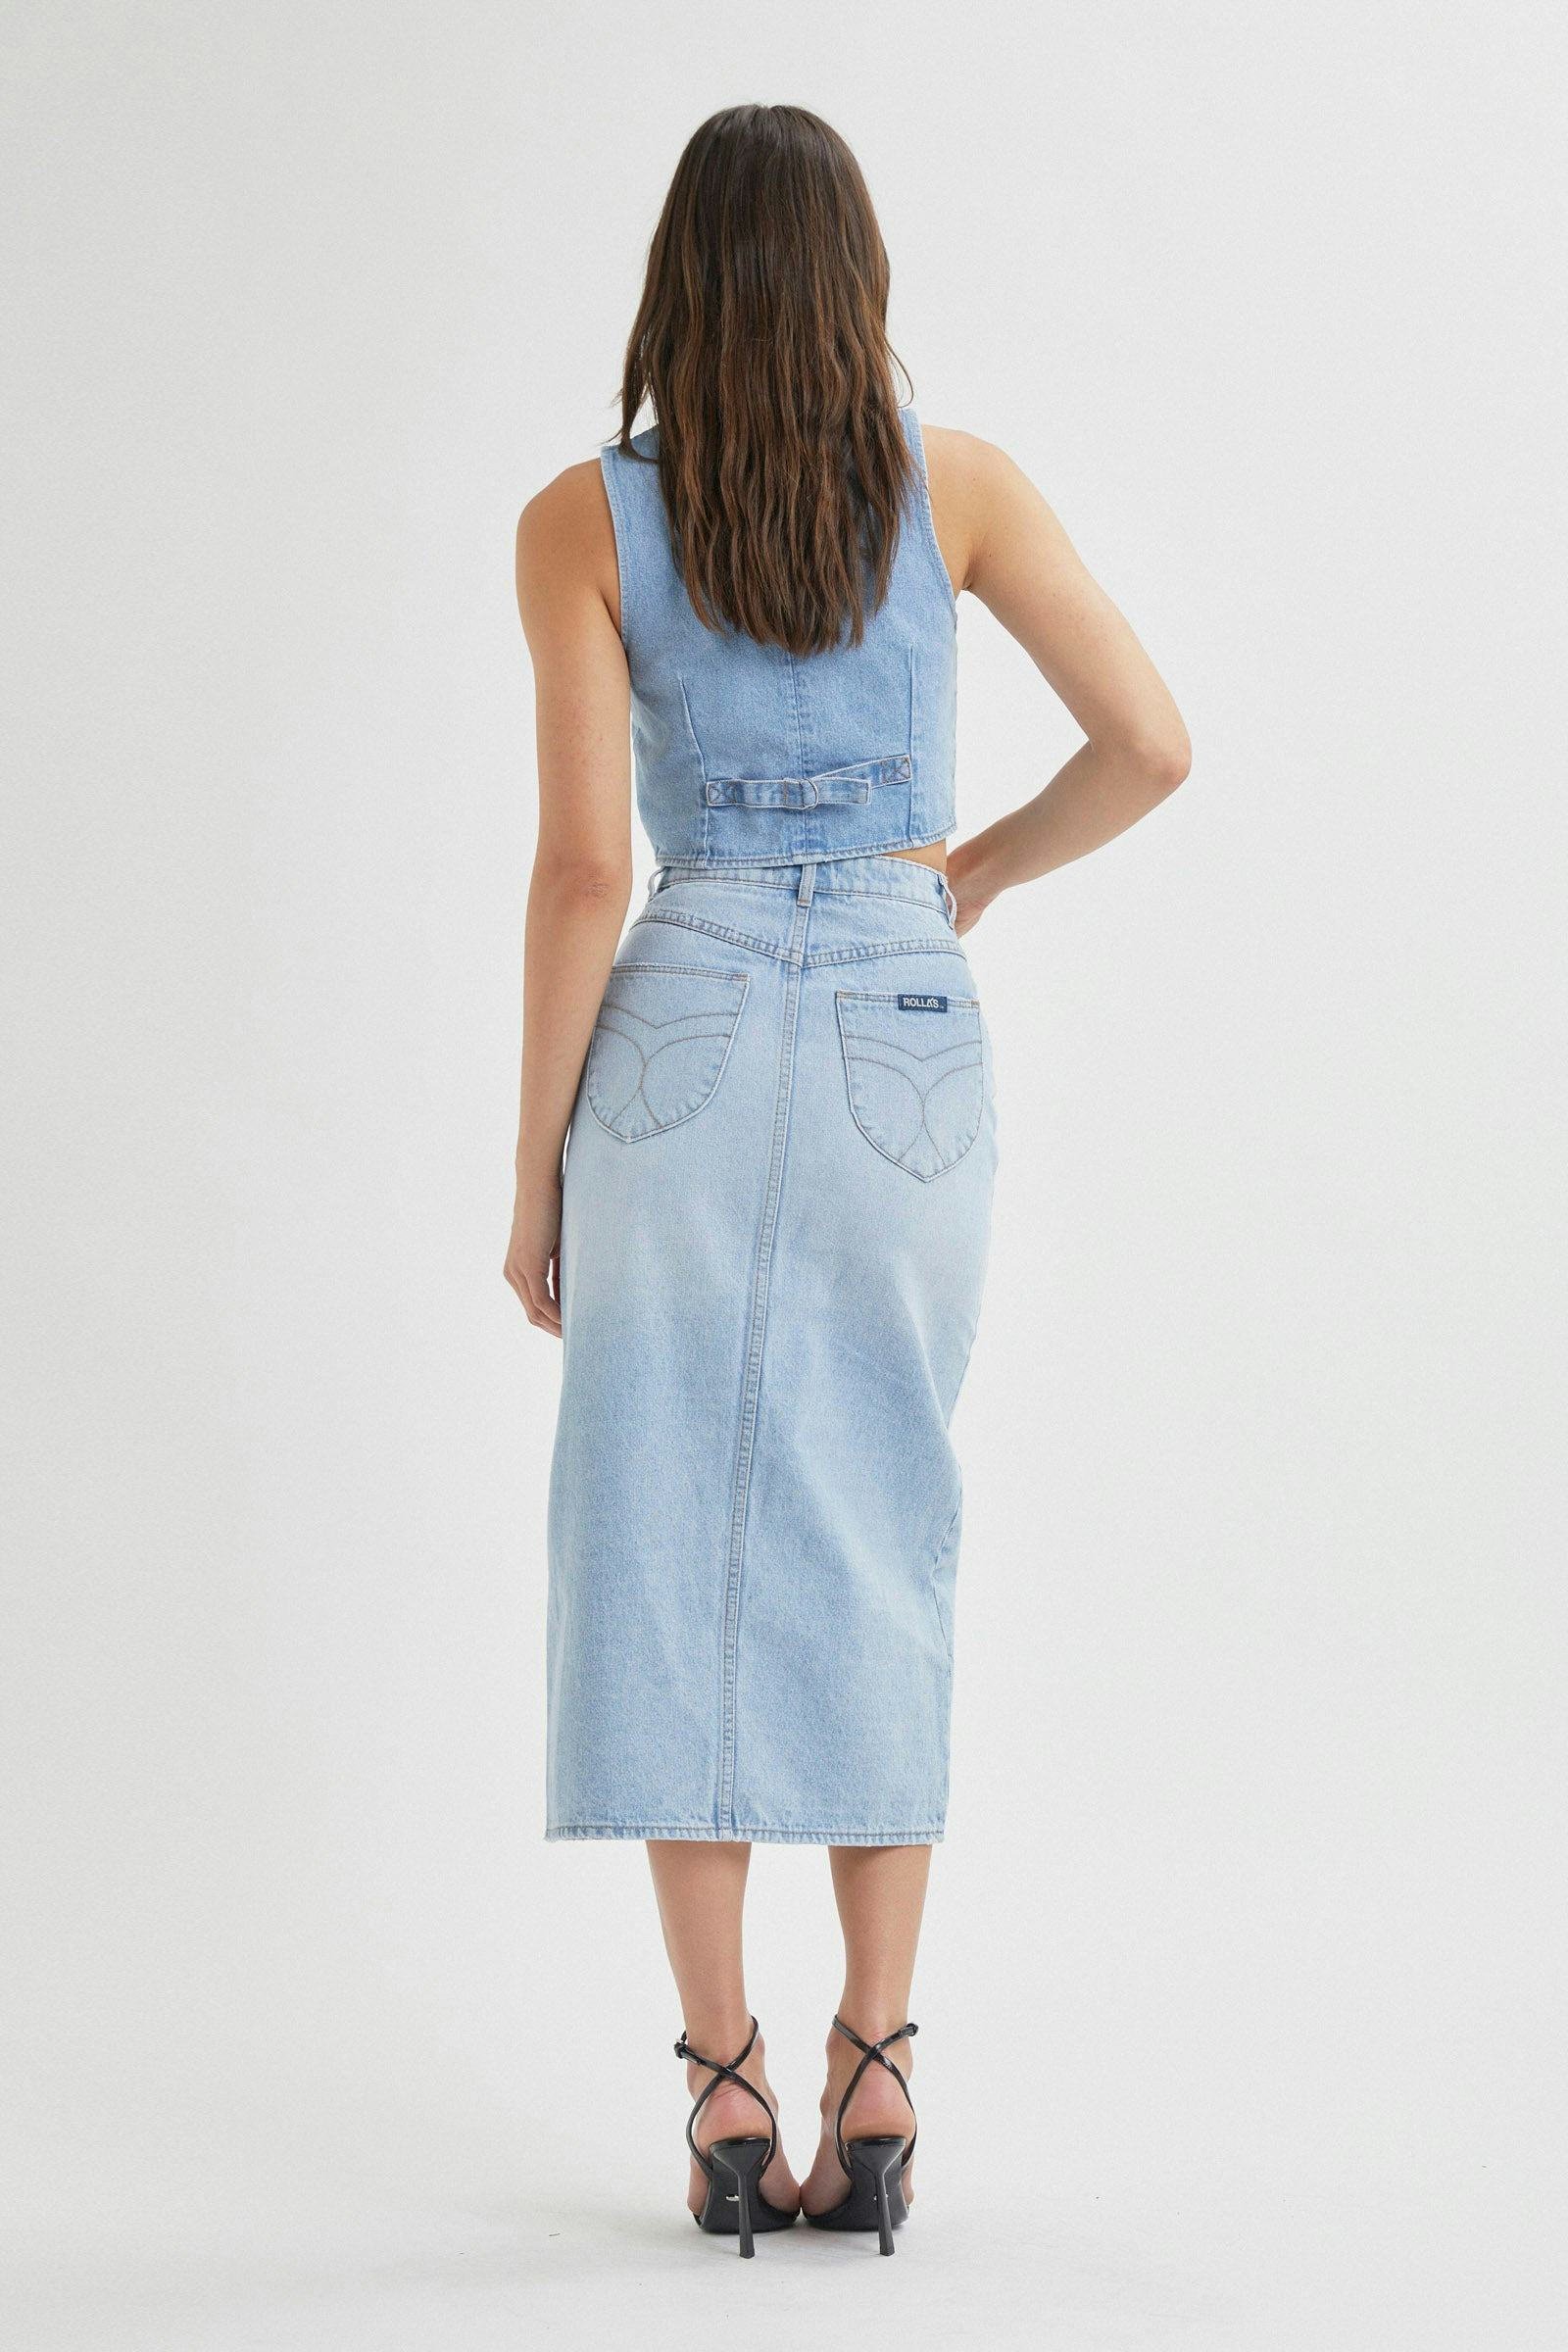 Buy Chicago Skirt - Old Stone Online | Rollas Jeans